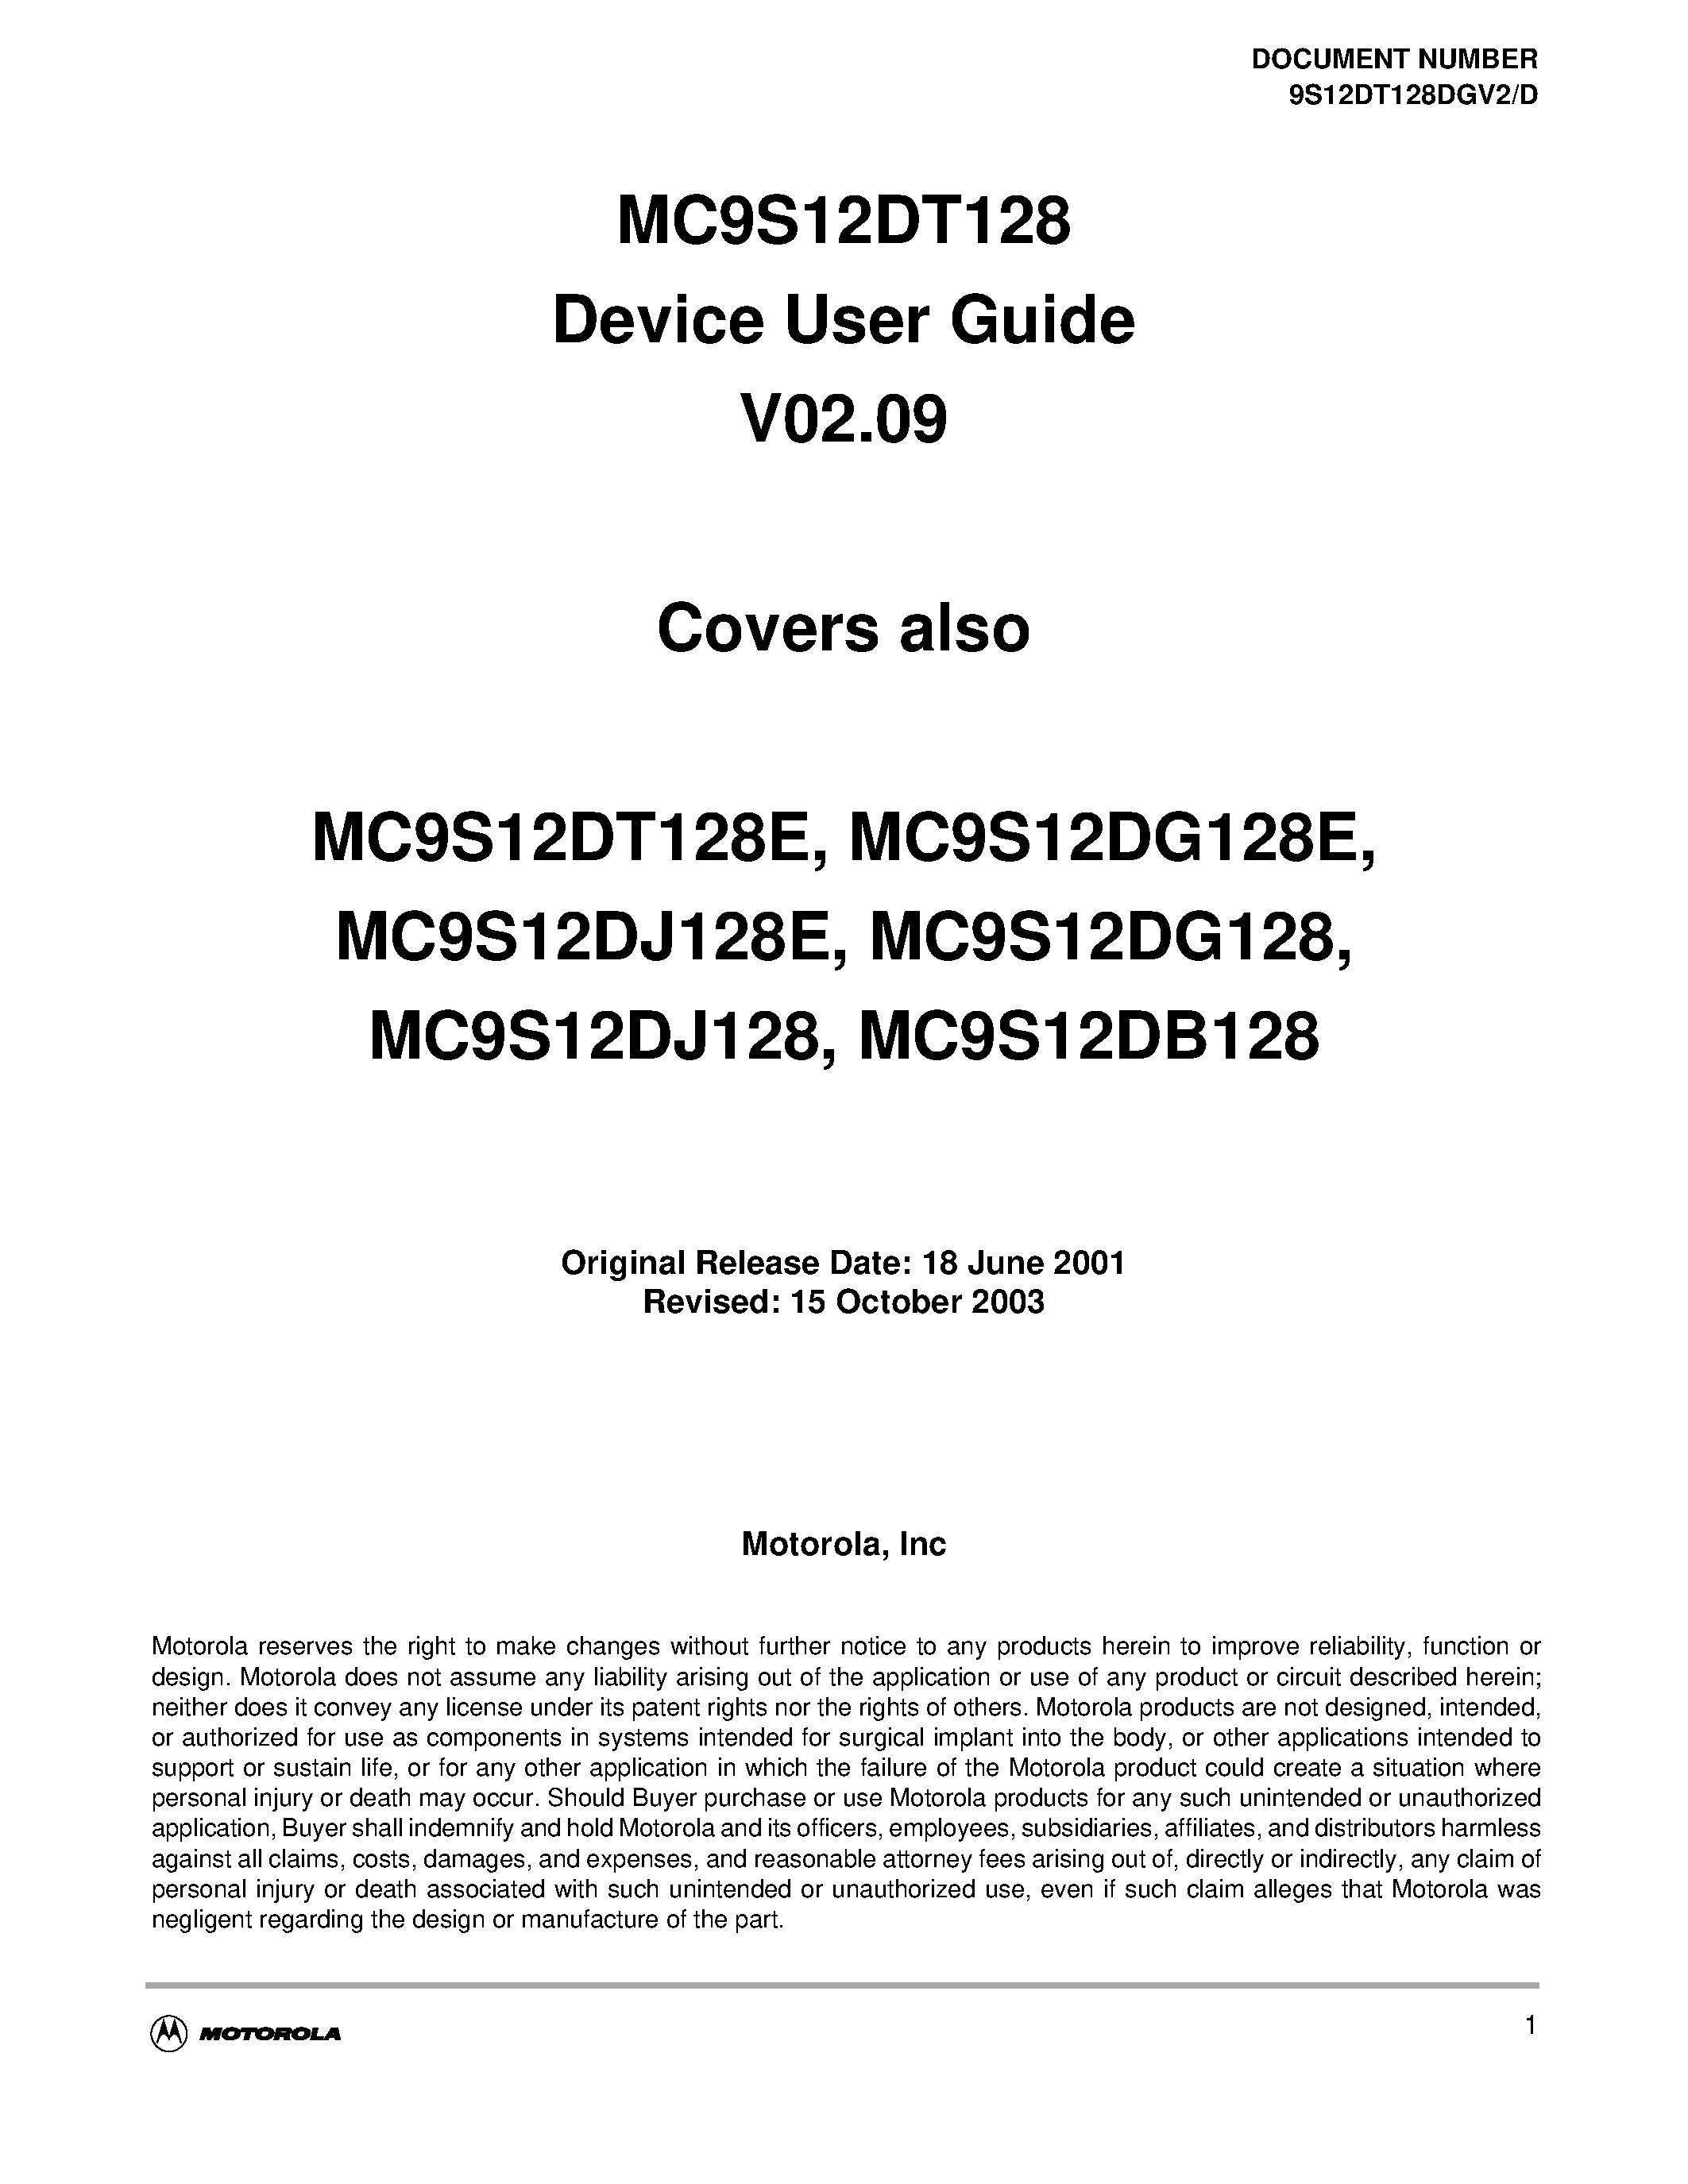 Datasheet S12SPIV2D - MC9S12DT128 Device User Guide V02.09 page 1